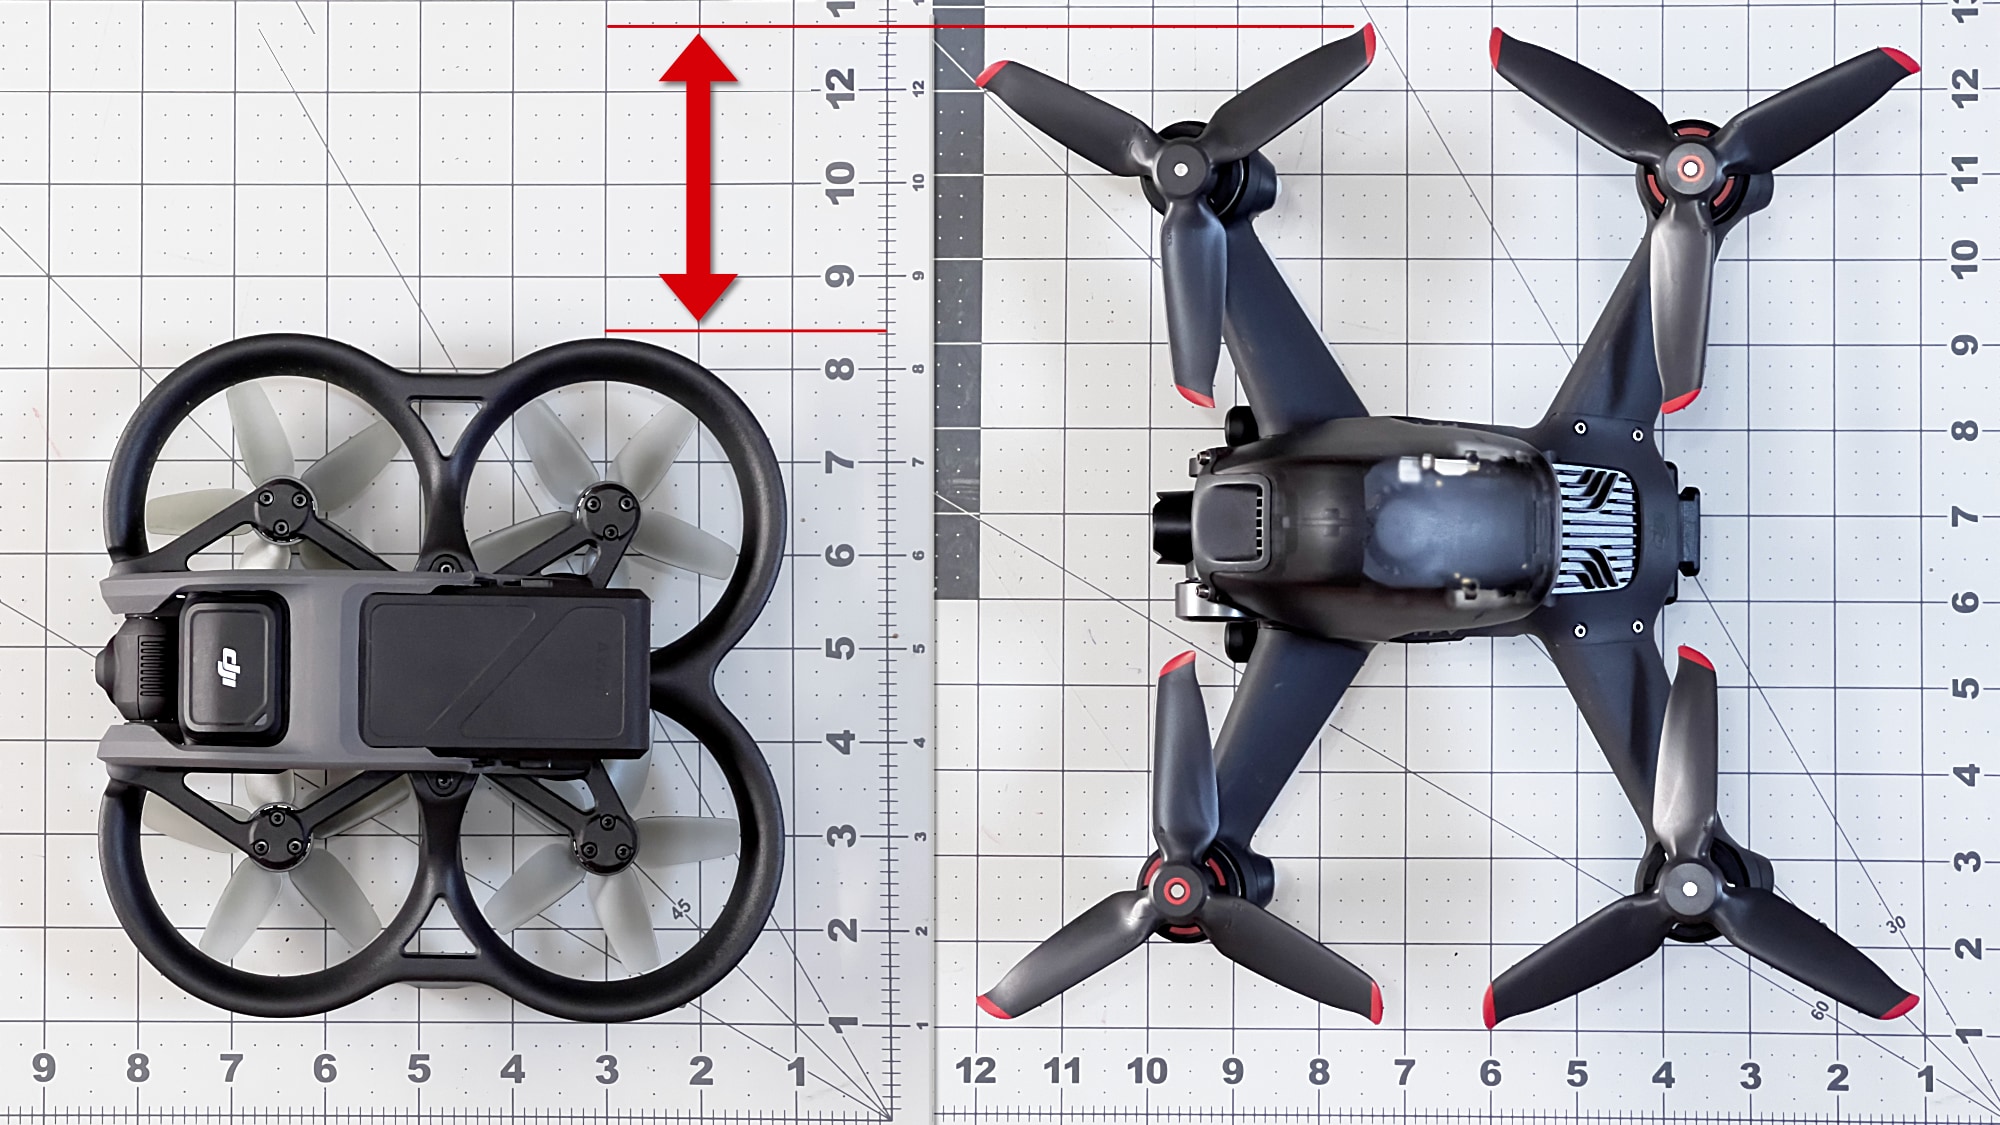 DJI Avata vs DJI FPV: Which FPV Drone Is Right For You?